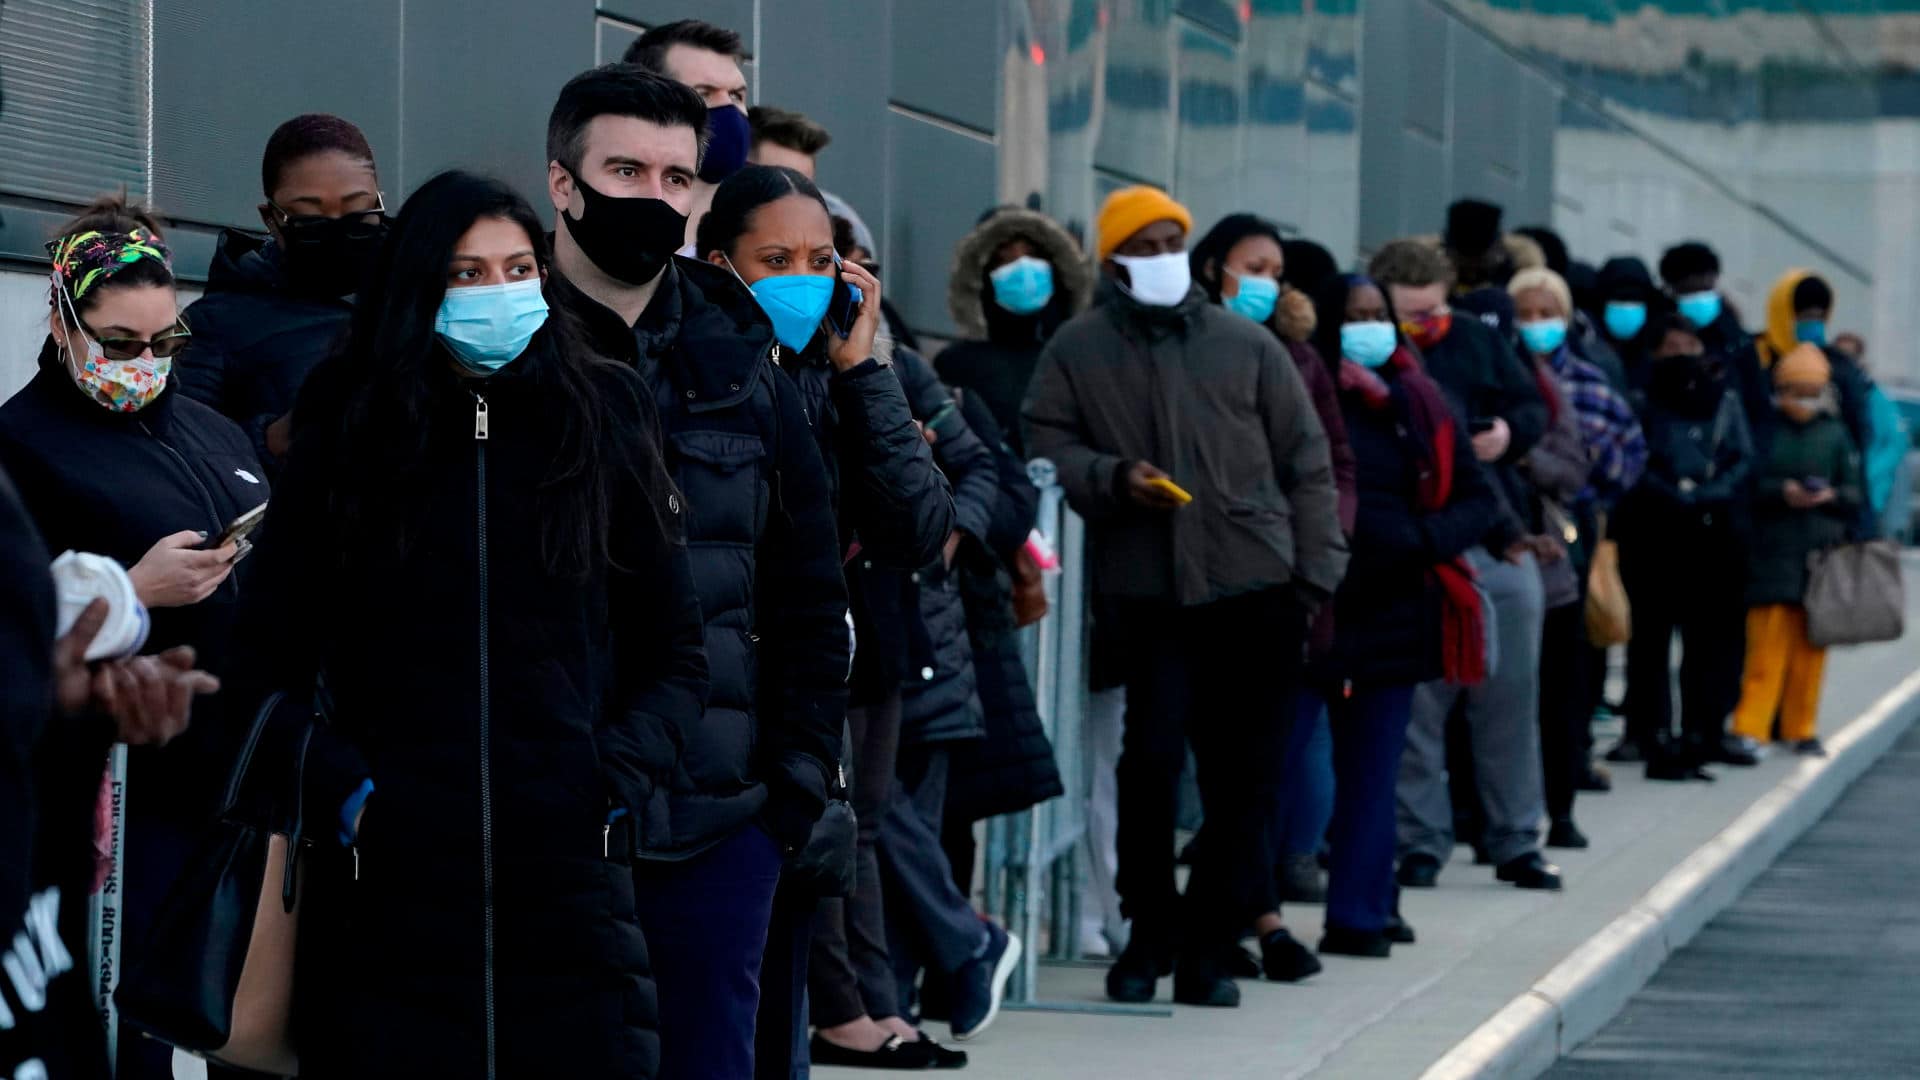 An early line forms at the Jacob Javits Convention Center Covid-19 vaccination hub on March 4, 2021 in New York City.